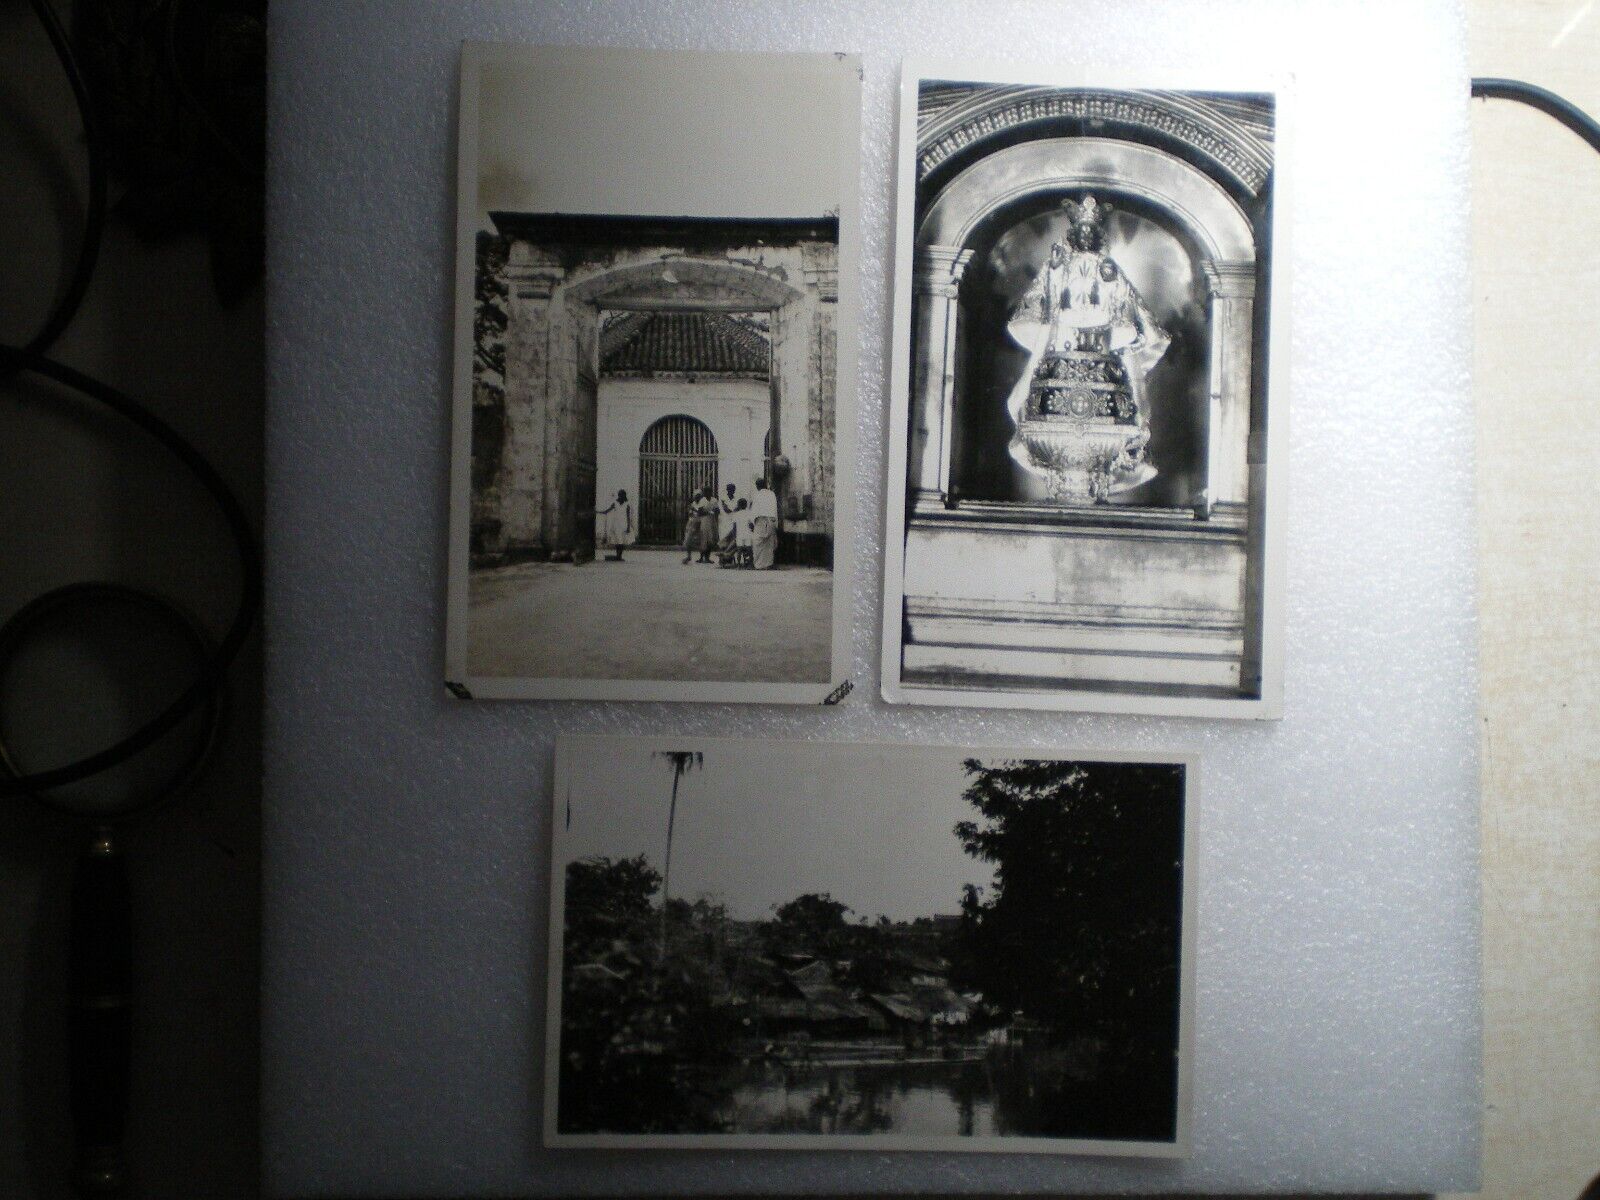 PHILIPPINES~RPPC~LOT OF 3 REAL PHOTO POST CARDS 1920's-1930's